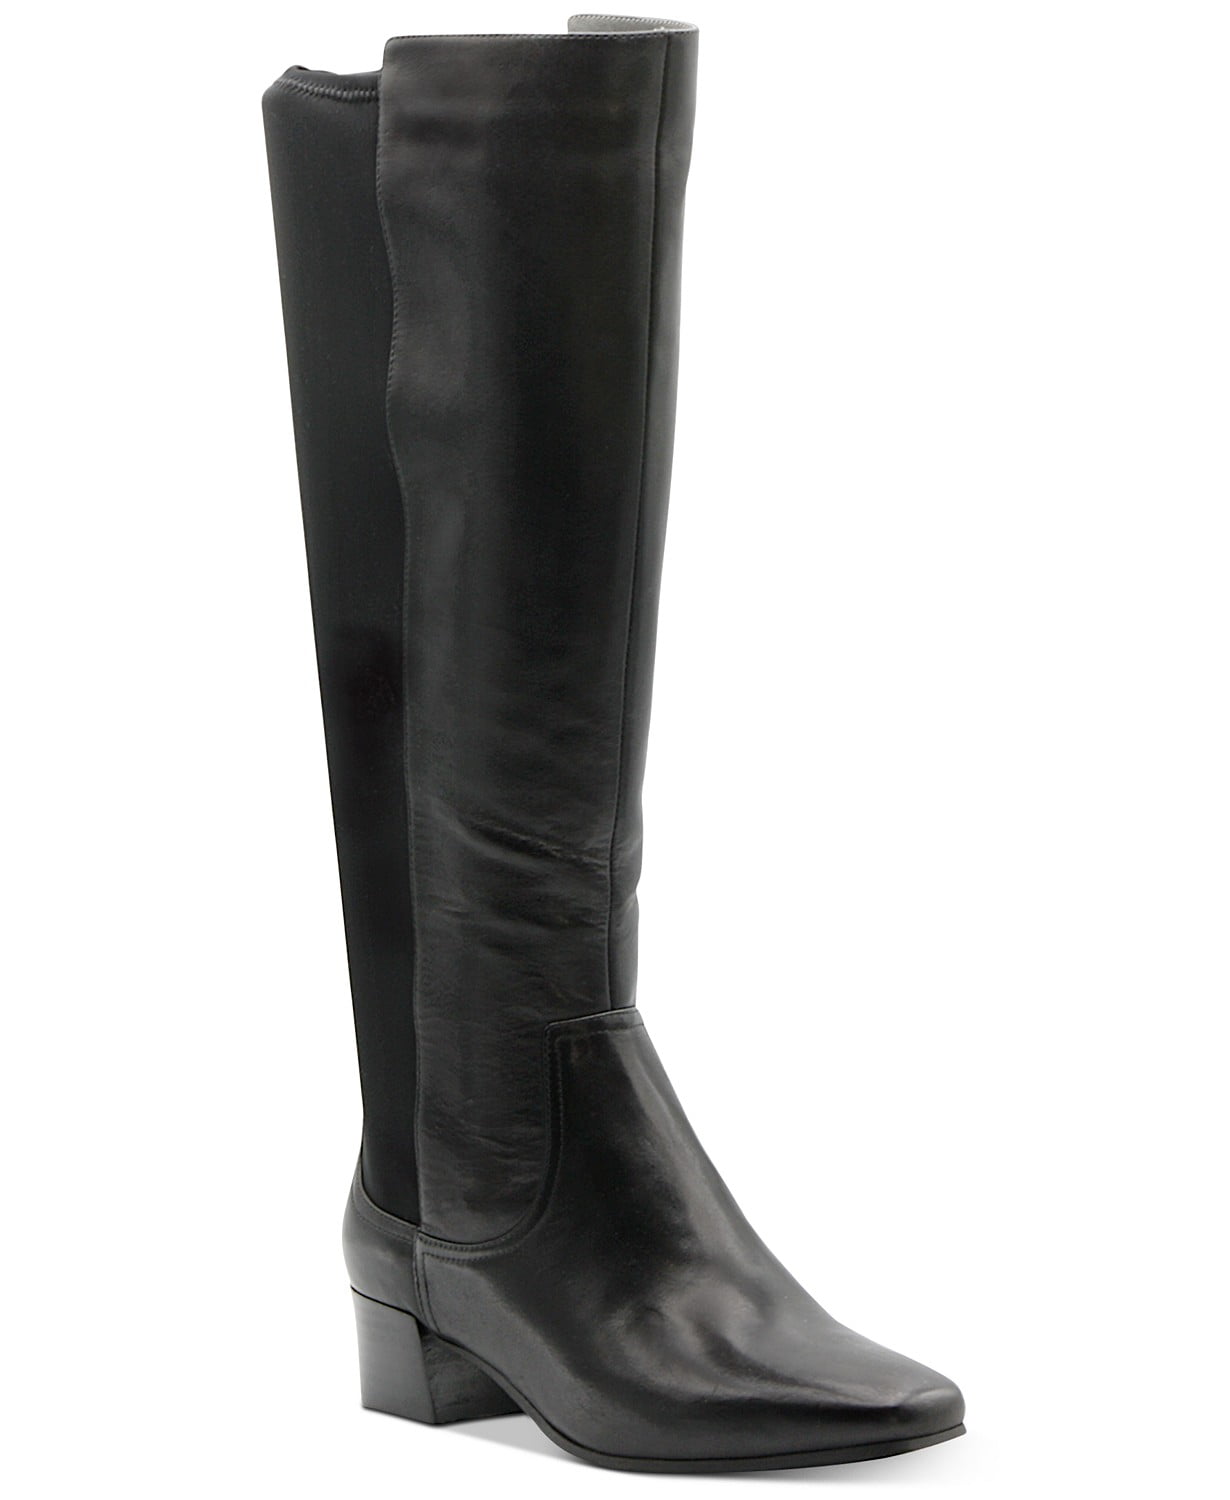 woocommerce-673321-2209615.cloudwaysapps.com-adrienne-vittadini-womens-black-leather-cecil-boots